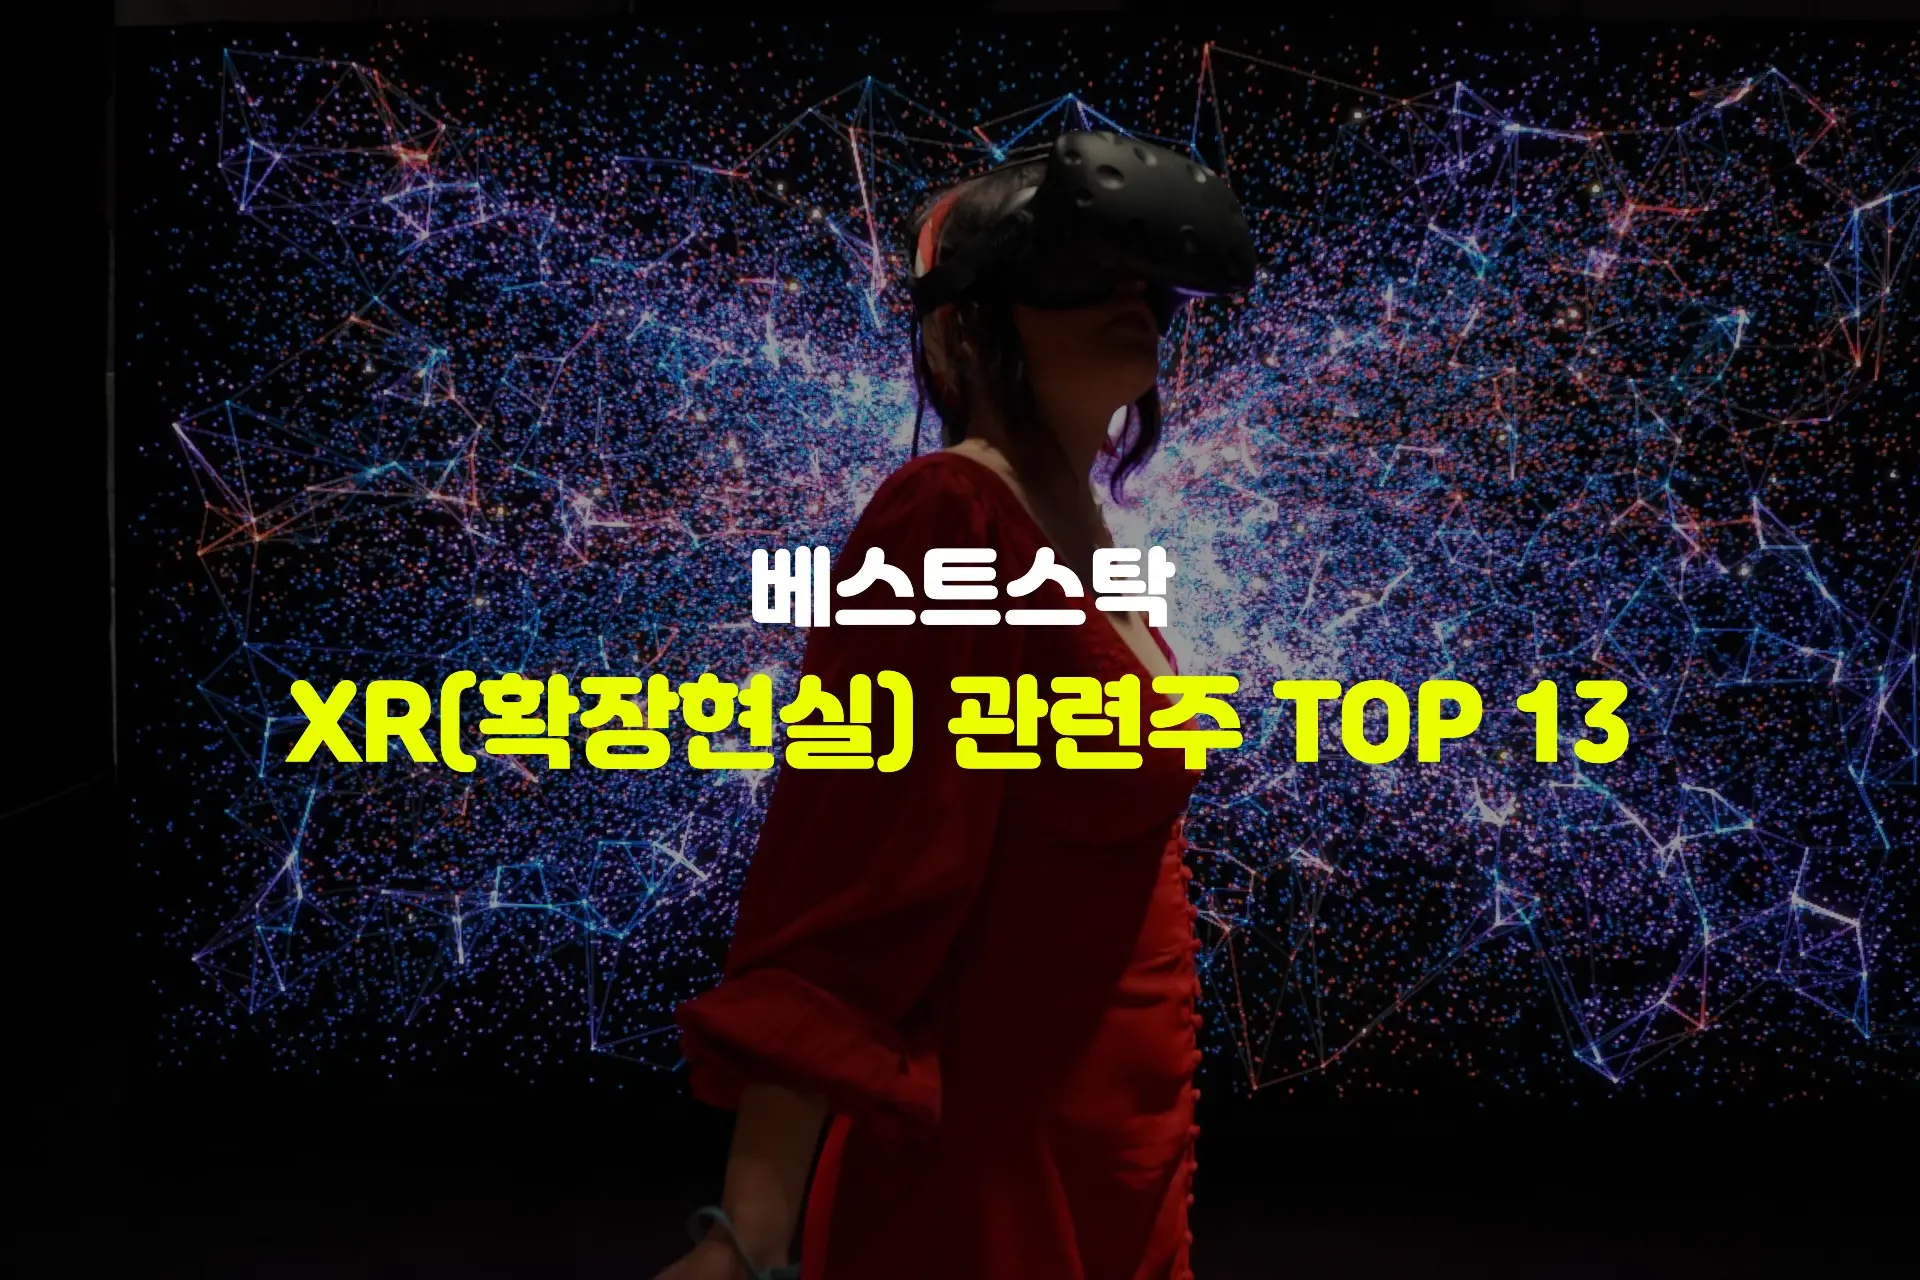 XR(확장현실) 관련주 TOP 13 썸네일